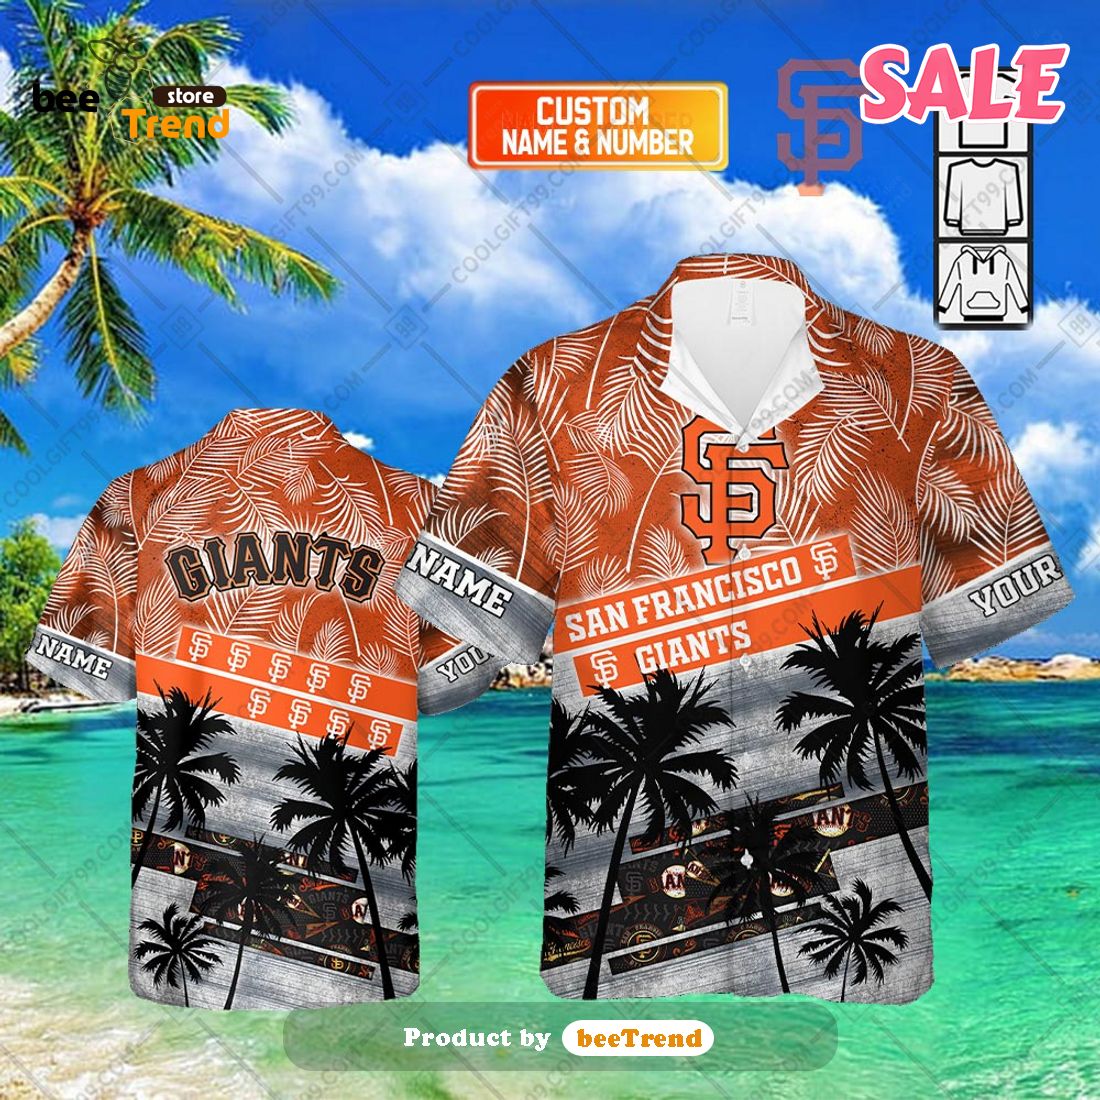 Personalized Name MLB San Francisco Giants Palm Tree Hawaiian Shirt and  Short - Macall Cloth Store - Destination for fashionistas